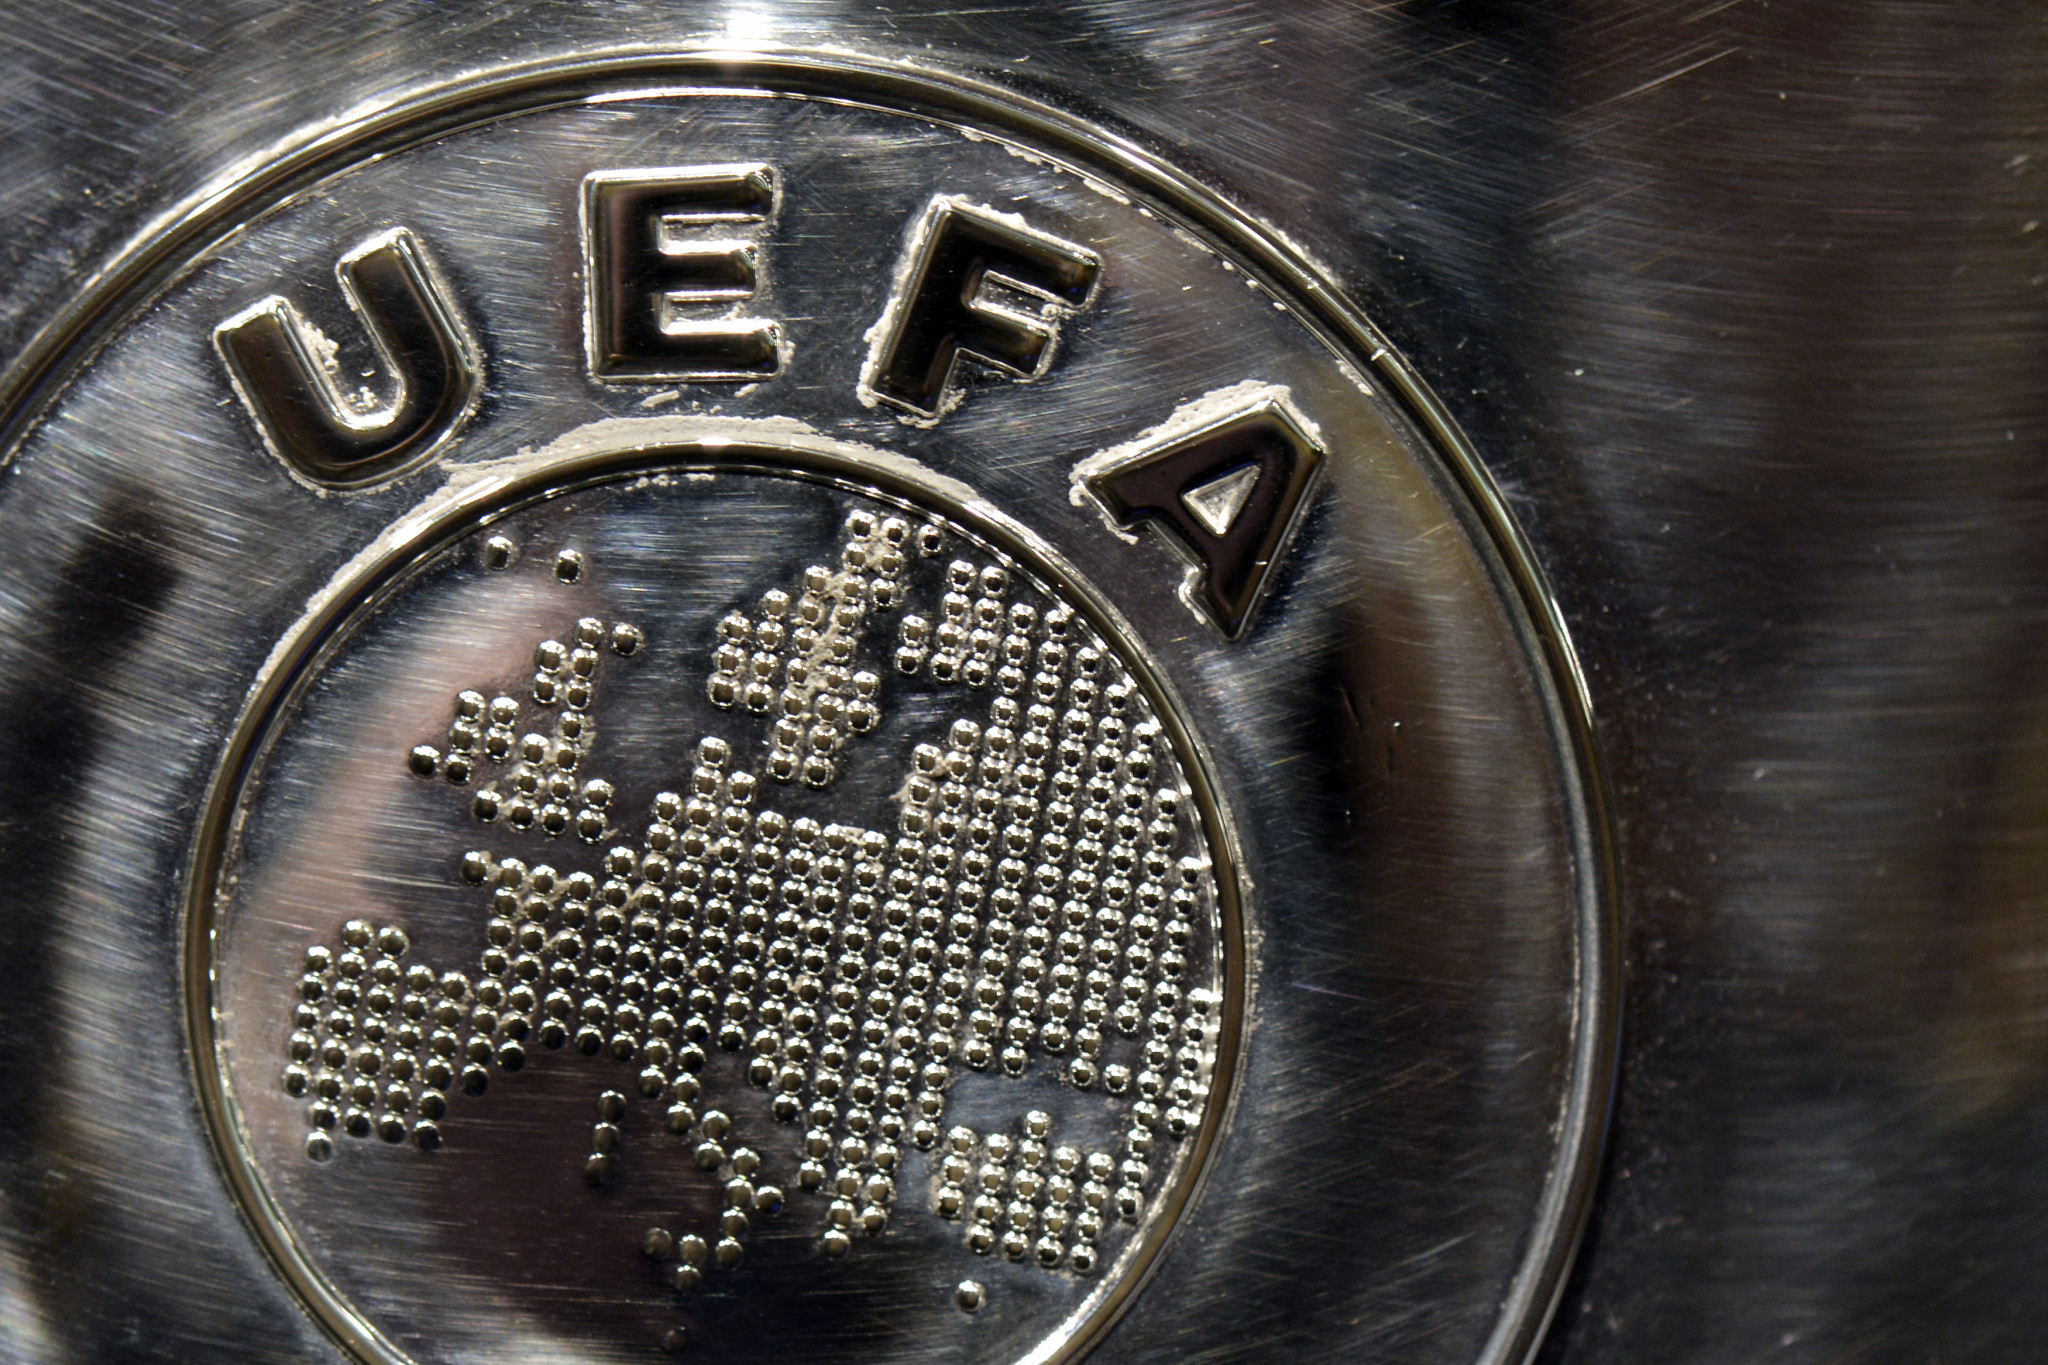 UEFA's Ordinary Congress is now set for April 20 next year, having been delayed by a little more than a month ©Getty Images